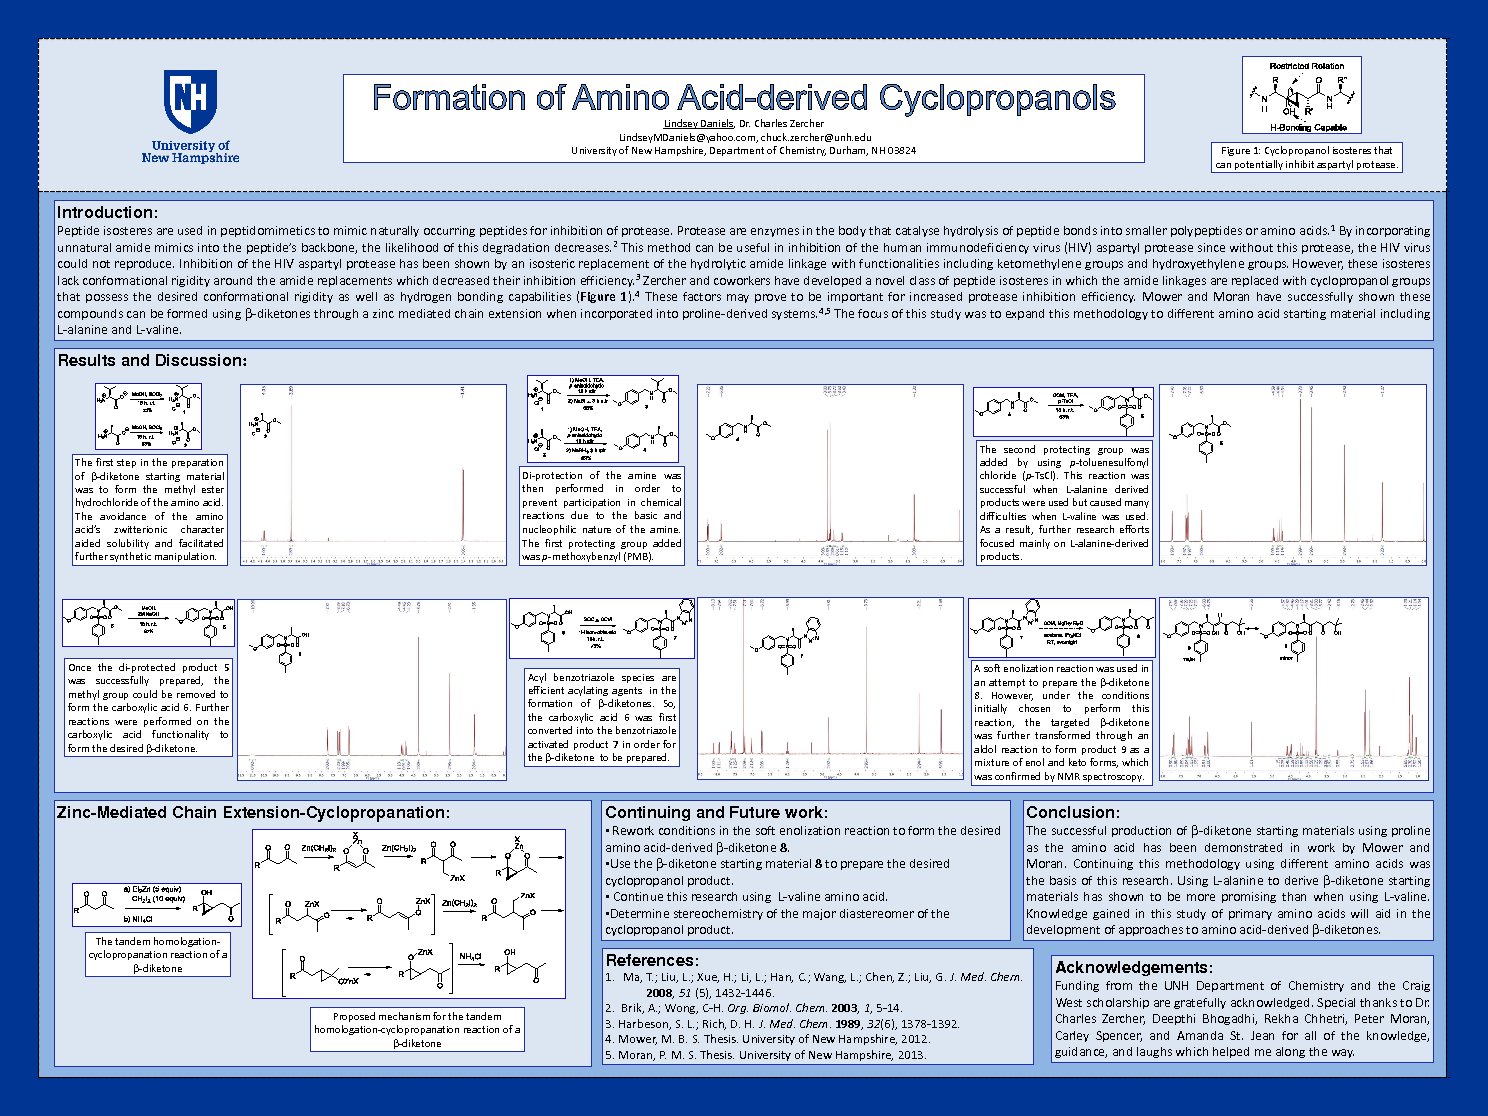 Formation Of Amino Acid-Derived Cyclopropanols by lmu623